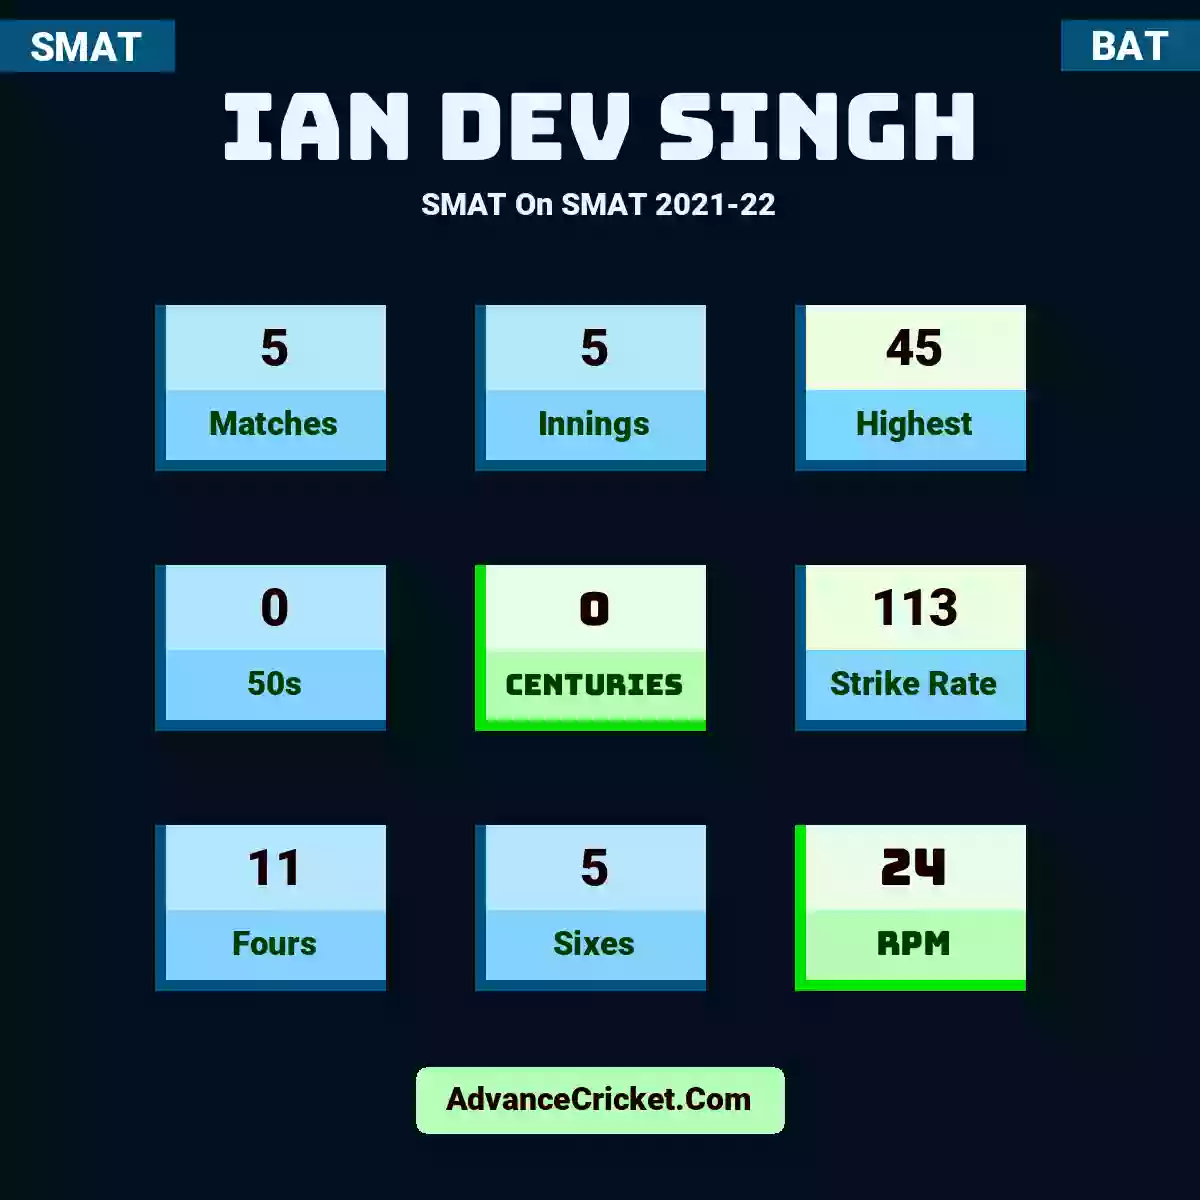 Ian Dev Singh SMAT  On SMAT 2021-22, Ian Dev Singh played 5 matches, scored 45 runs as highest, 0 half-centuries, and 0 centuries, with a strike rate of 113. I.Singh hit 11 fours and 5 sixes, with an RPM of 24.